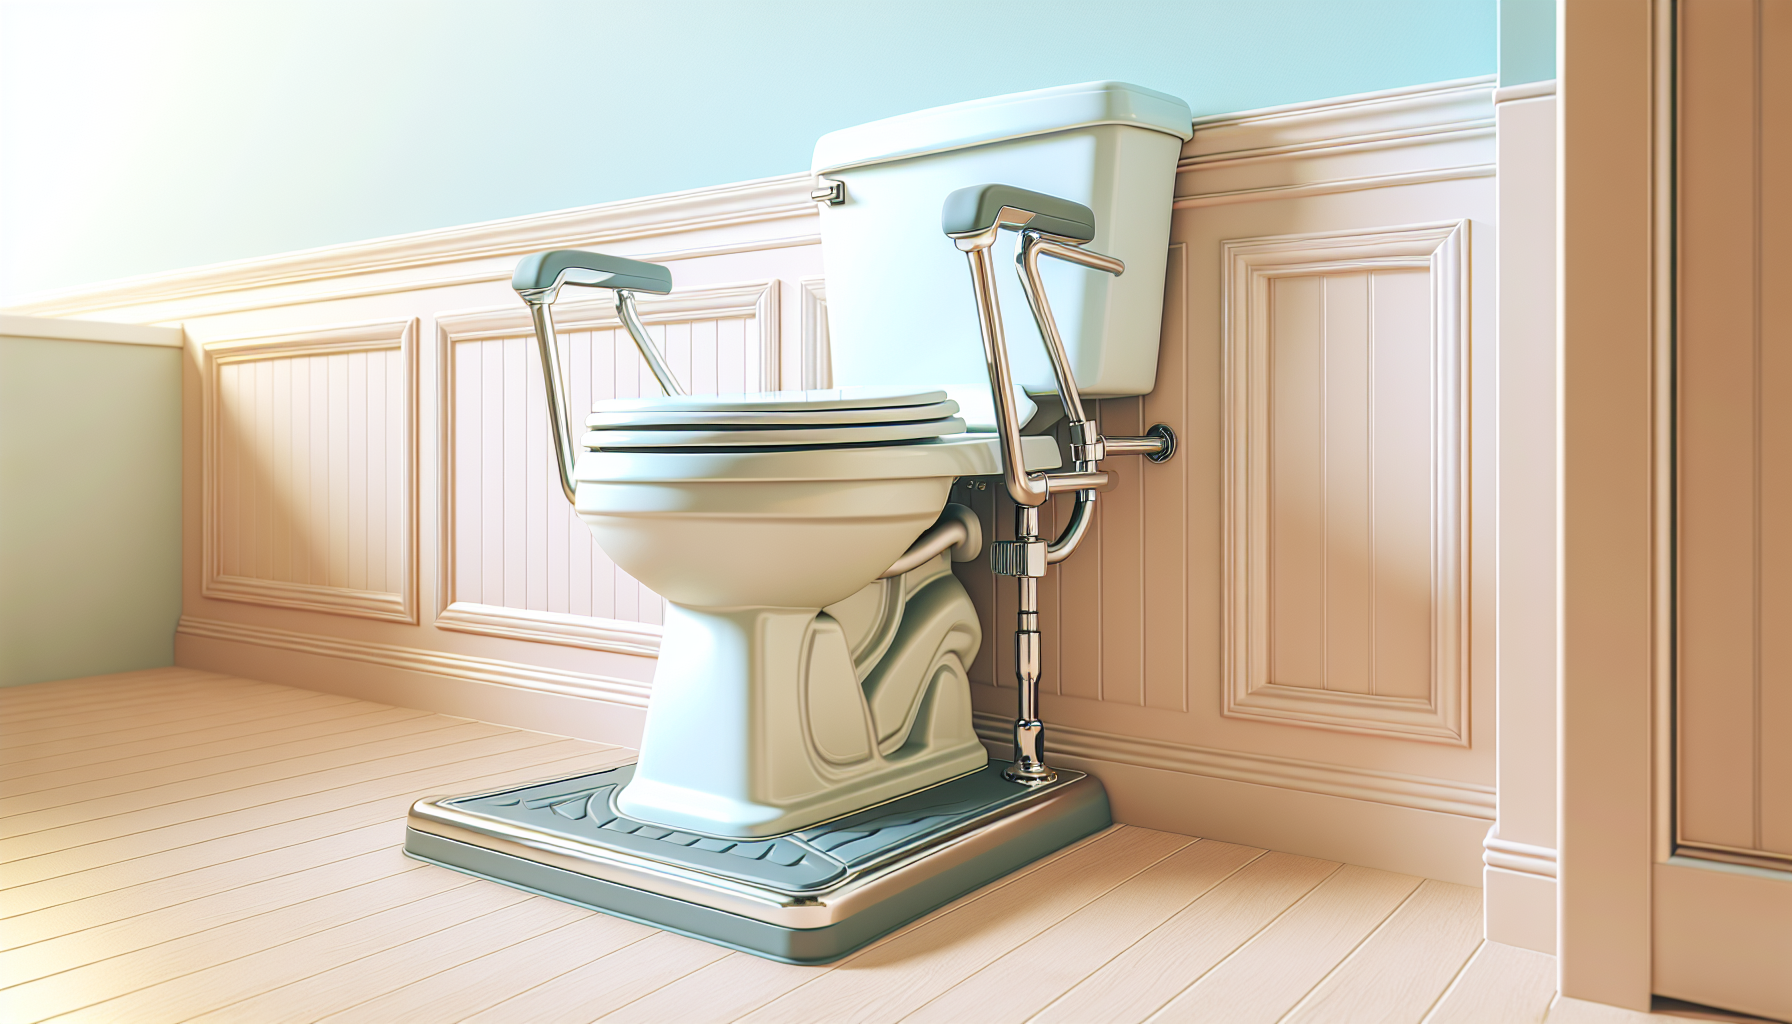 Illustration of an adapted toilet with raised toilet seats and lever-style handles